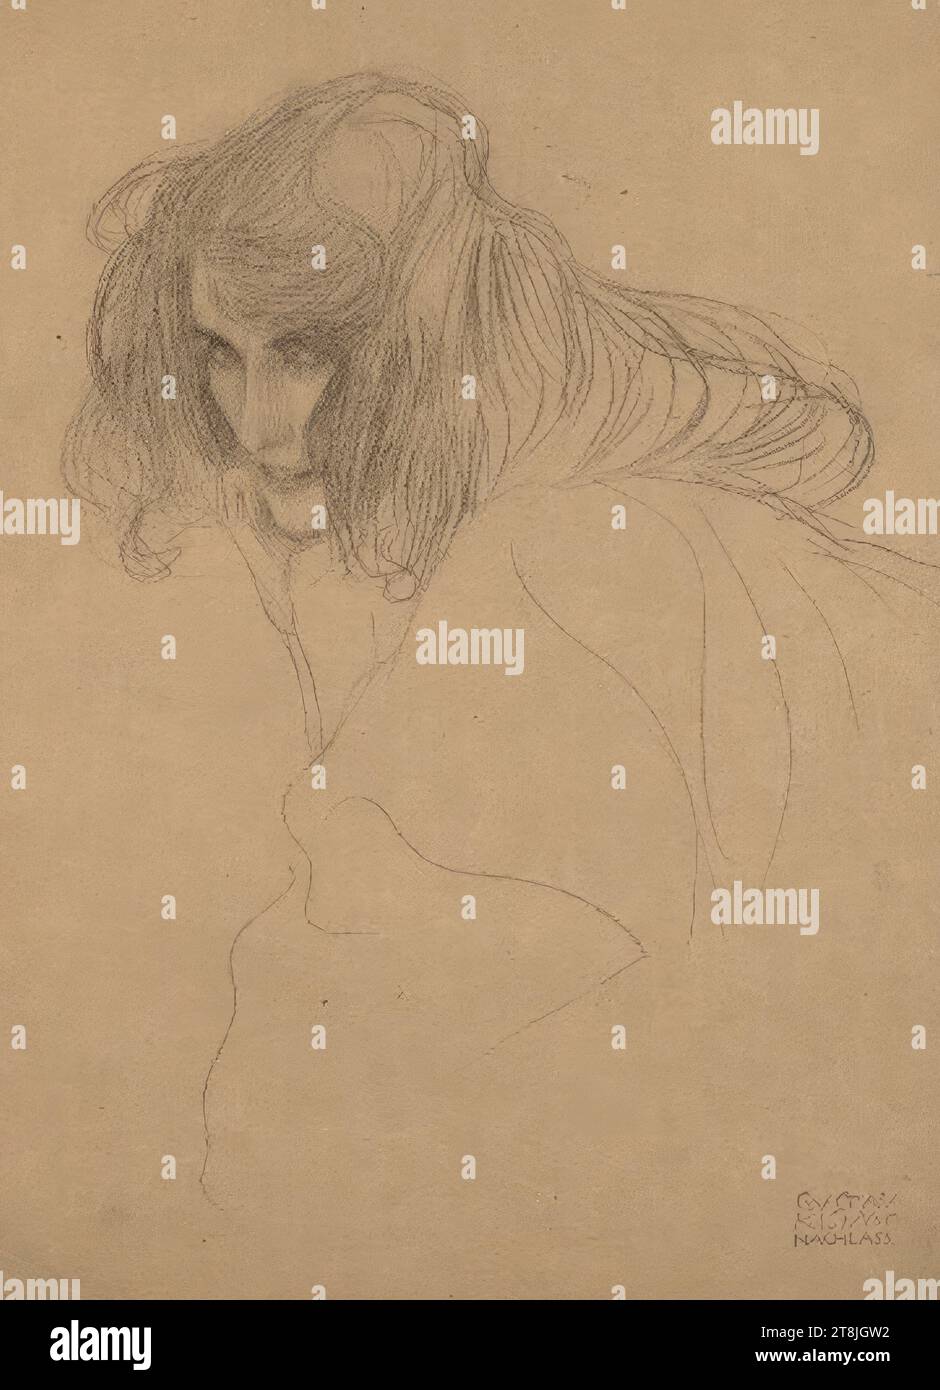 Study for 'Unchastity' in the Beethoven Frieze, Beethoven Frieze, Gustav Klimt, Vienna 1862 - 1918 Vienna, 1901, drawing, black chalk on paper, 45.1 × 31.1 cm, right. Estate stamp, Austria Stock Photo